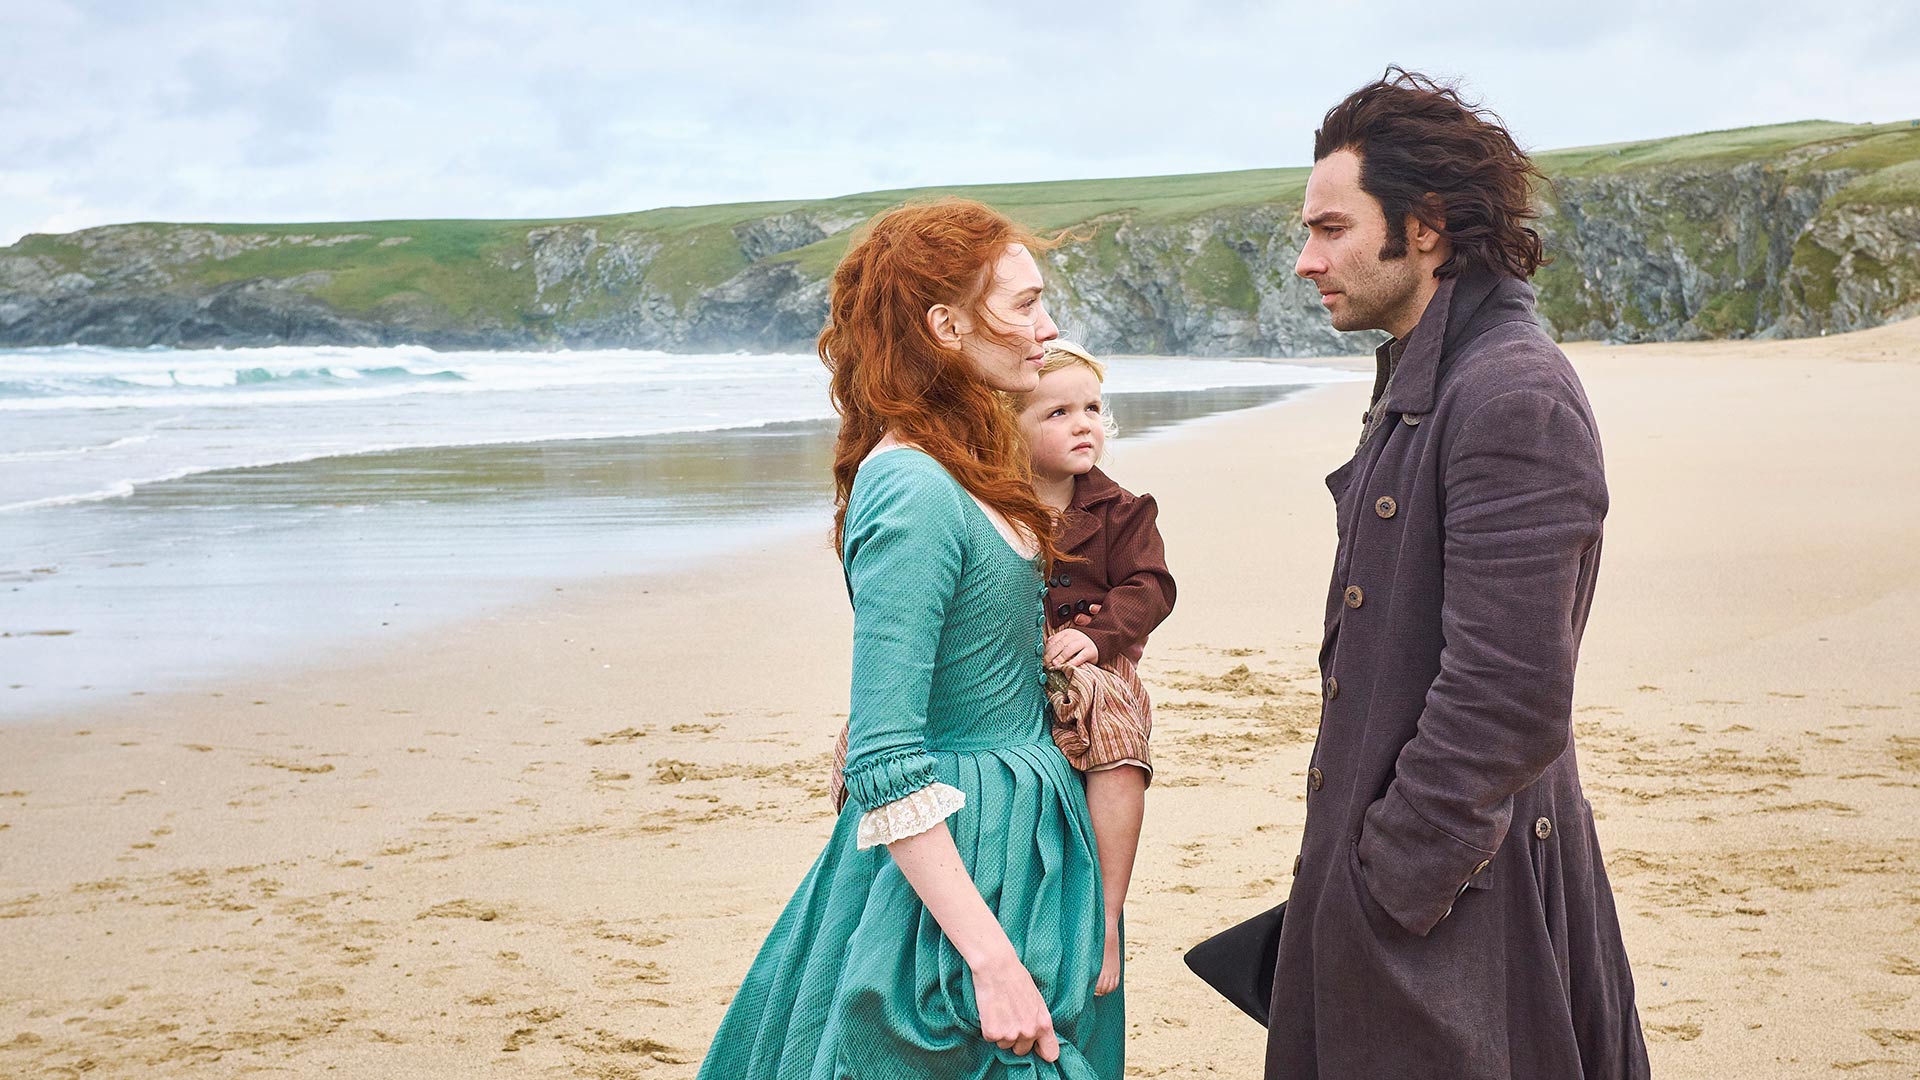 Shown from left to right: Eleanor Tomlinson as Demelza and Aidan Turner as Ross